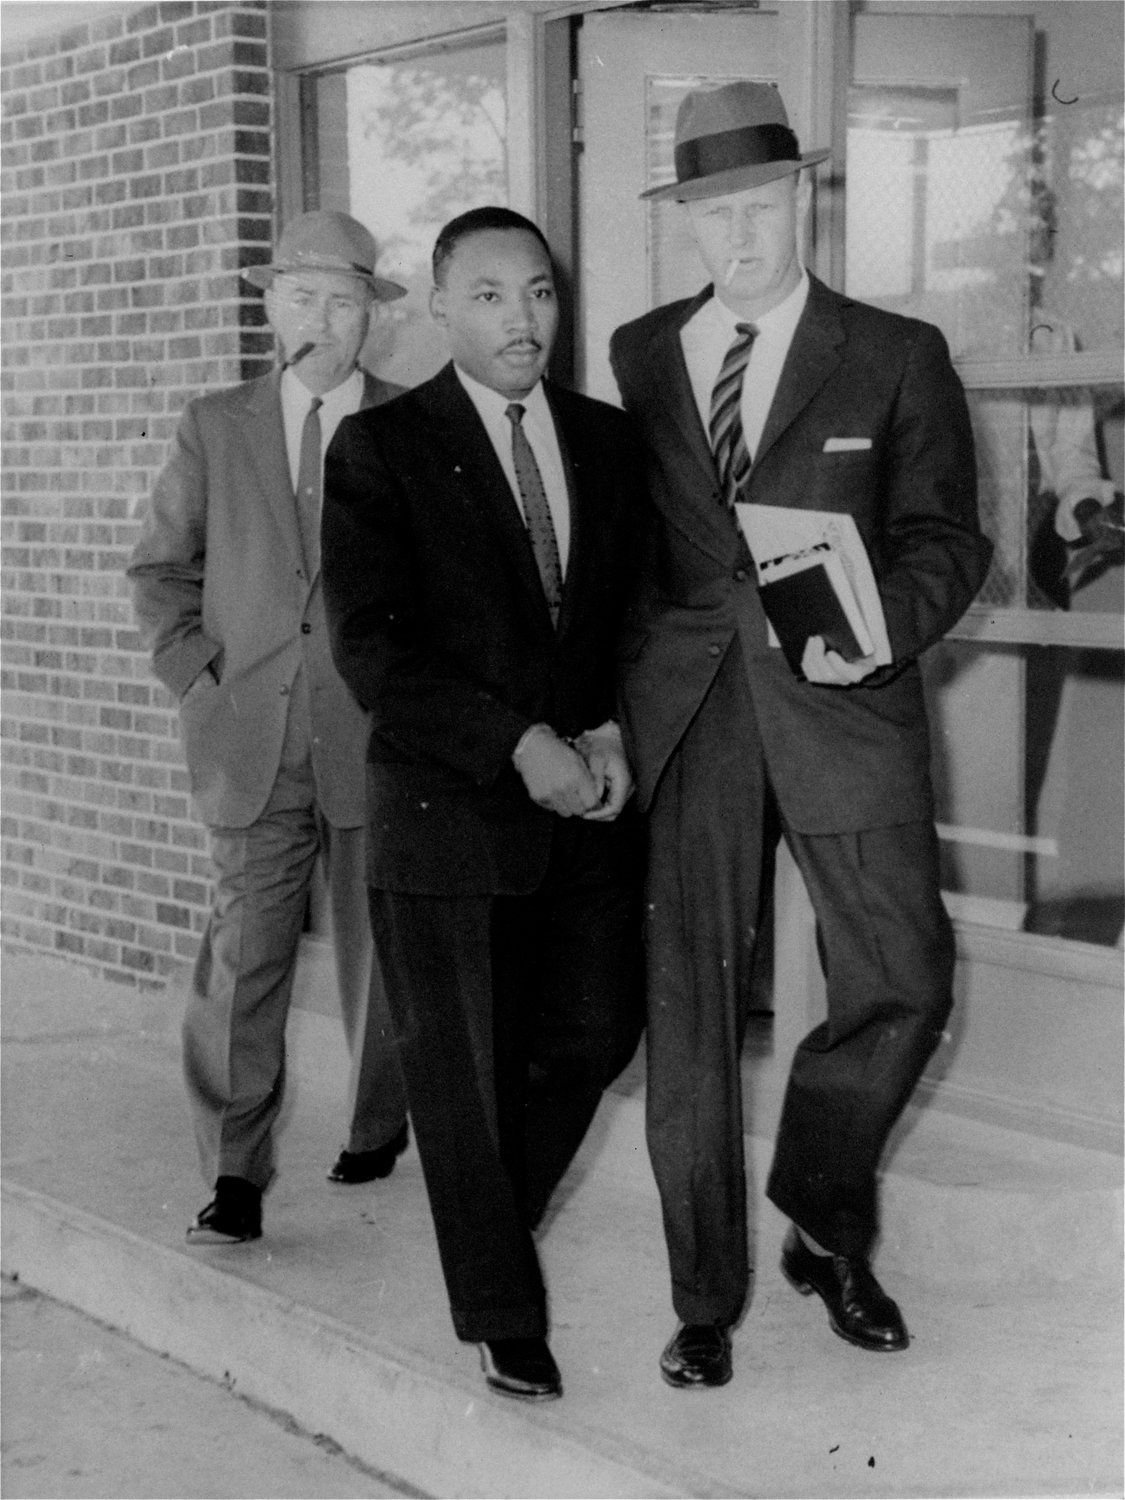 FILE - In this Oct. 25, 1960 file photo, Rev. Martin Luther King, Jr., integration leader, is escorted from the Atlanta, Ga. jail by two unidentified officers as he is taken to neighboring DeKalb county courthouse for a traffic hearing. Following the publication of "An Appeal for Human Rights" on March 9, 1960, students at Atlanta's historically black colleges waged a nonviolent campaign of boycotts and sit-ins protesting segregation at restaurants, theaters, parks and government buildings. (AP Photo/Horace Cort, File)